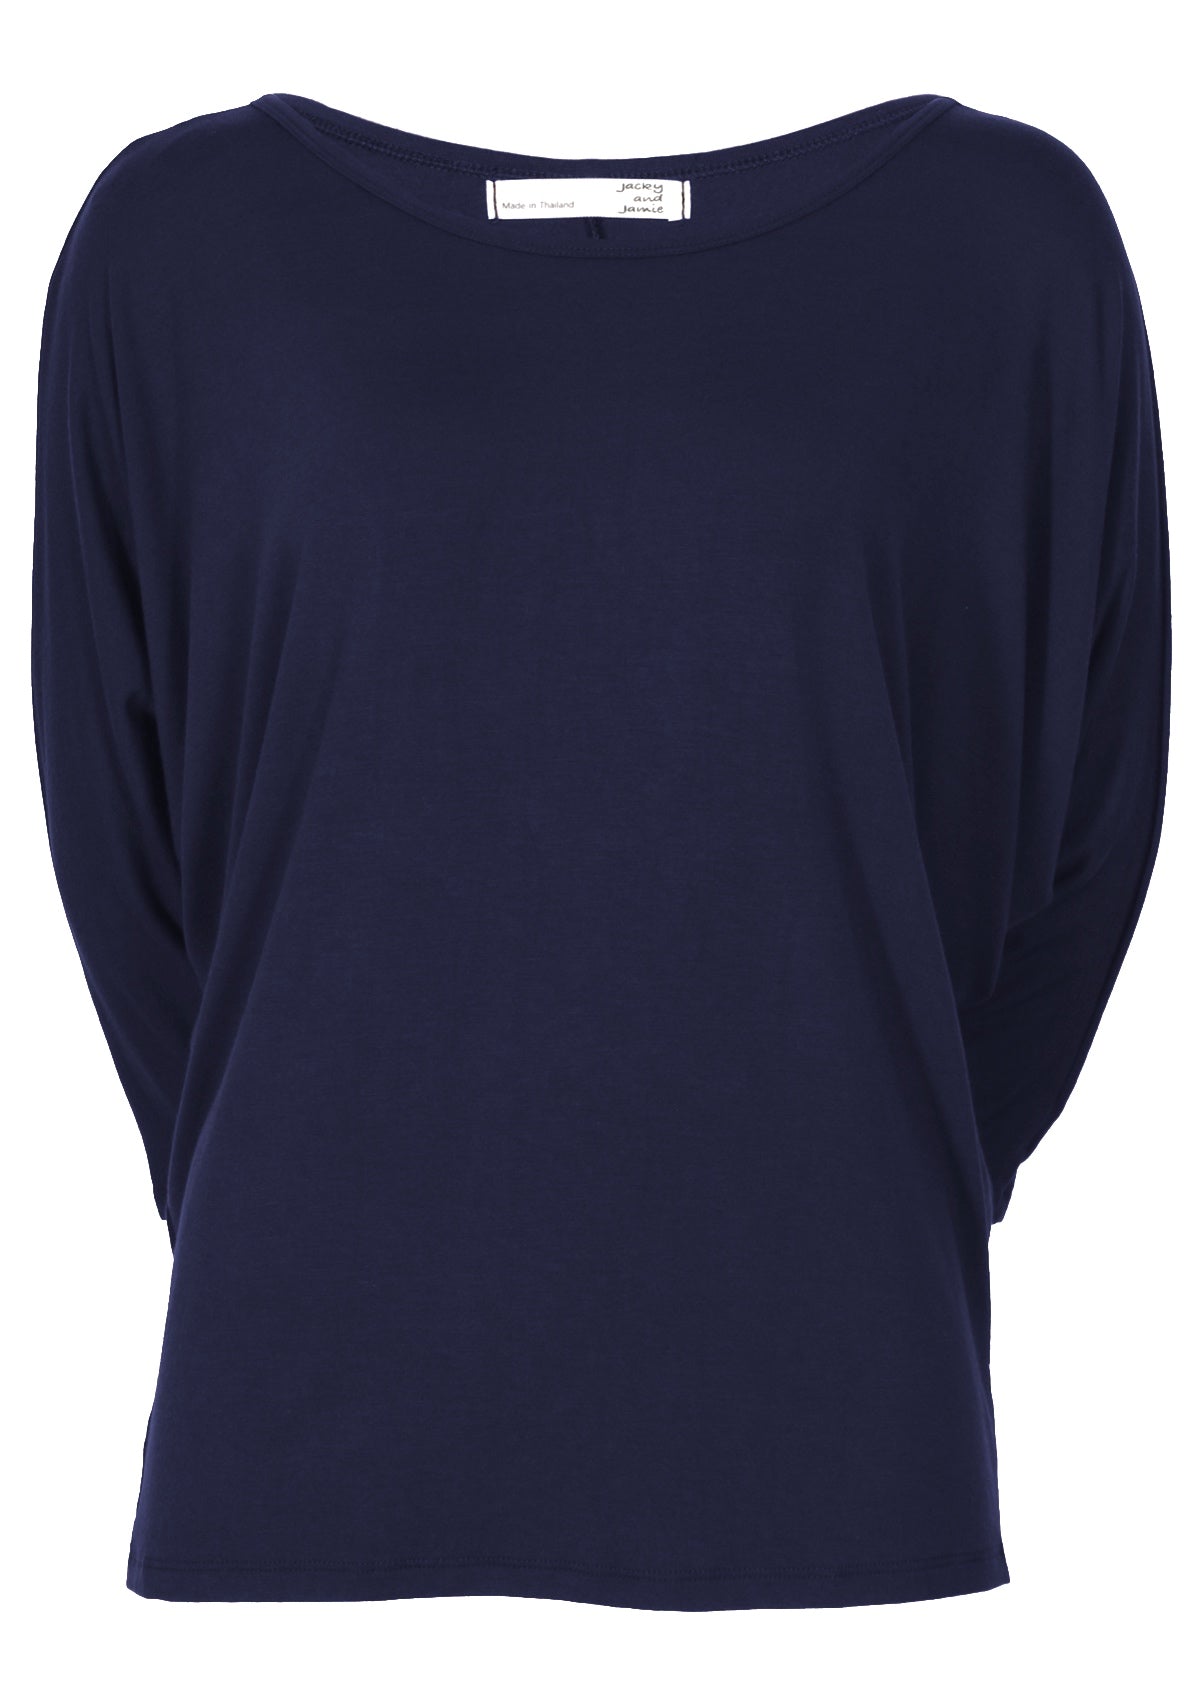 Front view of women's 3/4 sleeve rayon batwing round neckline navy blue top.